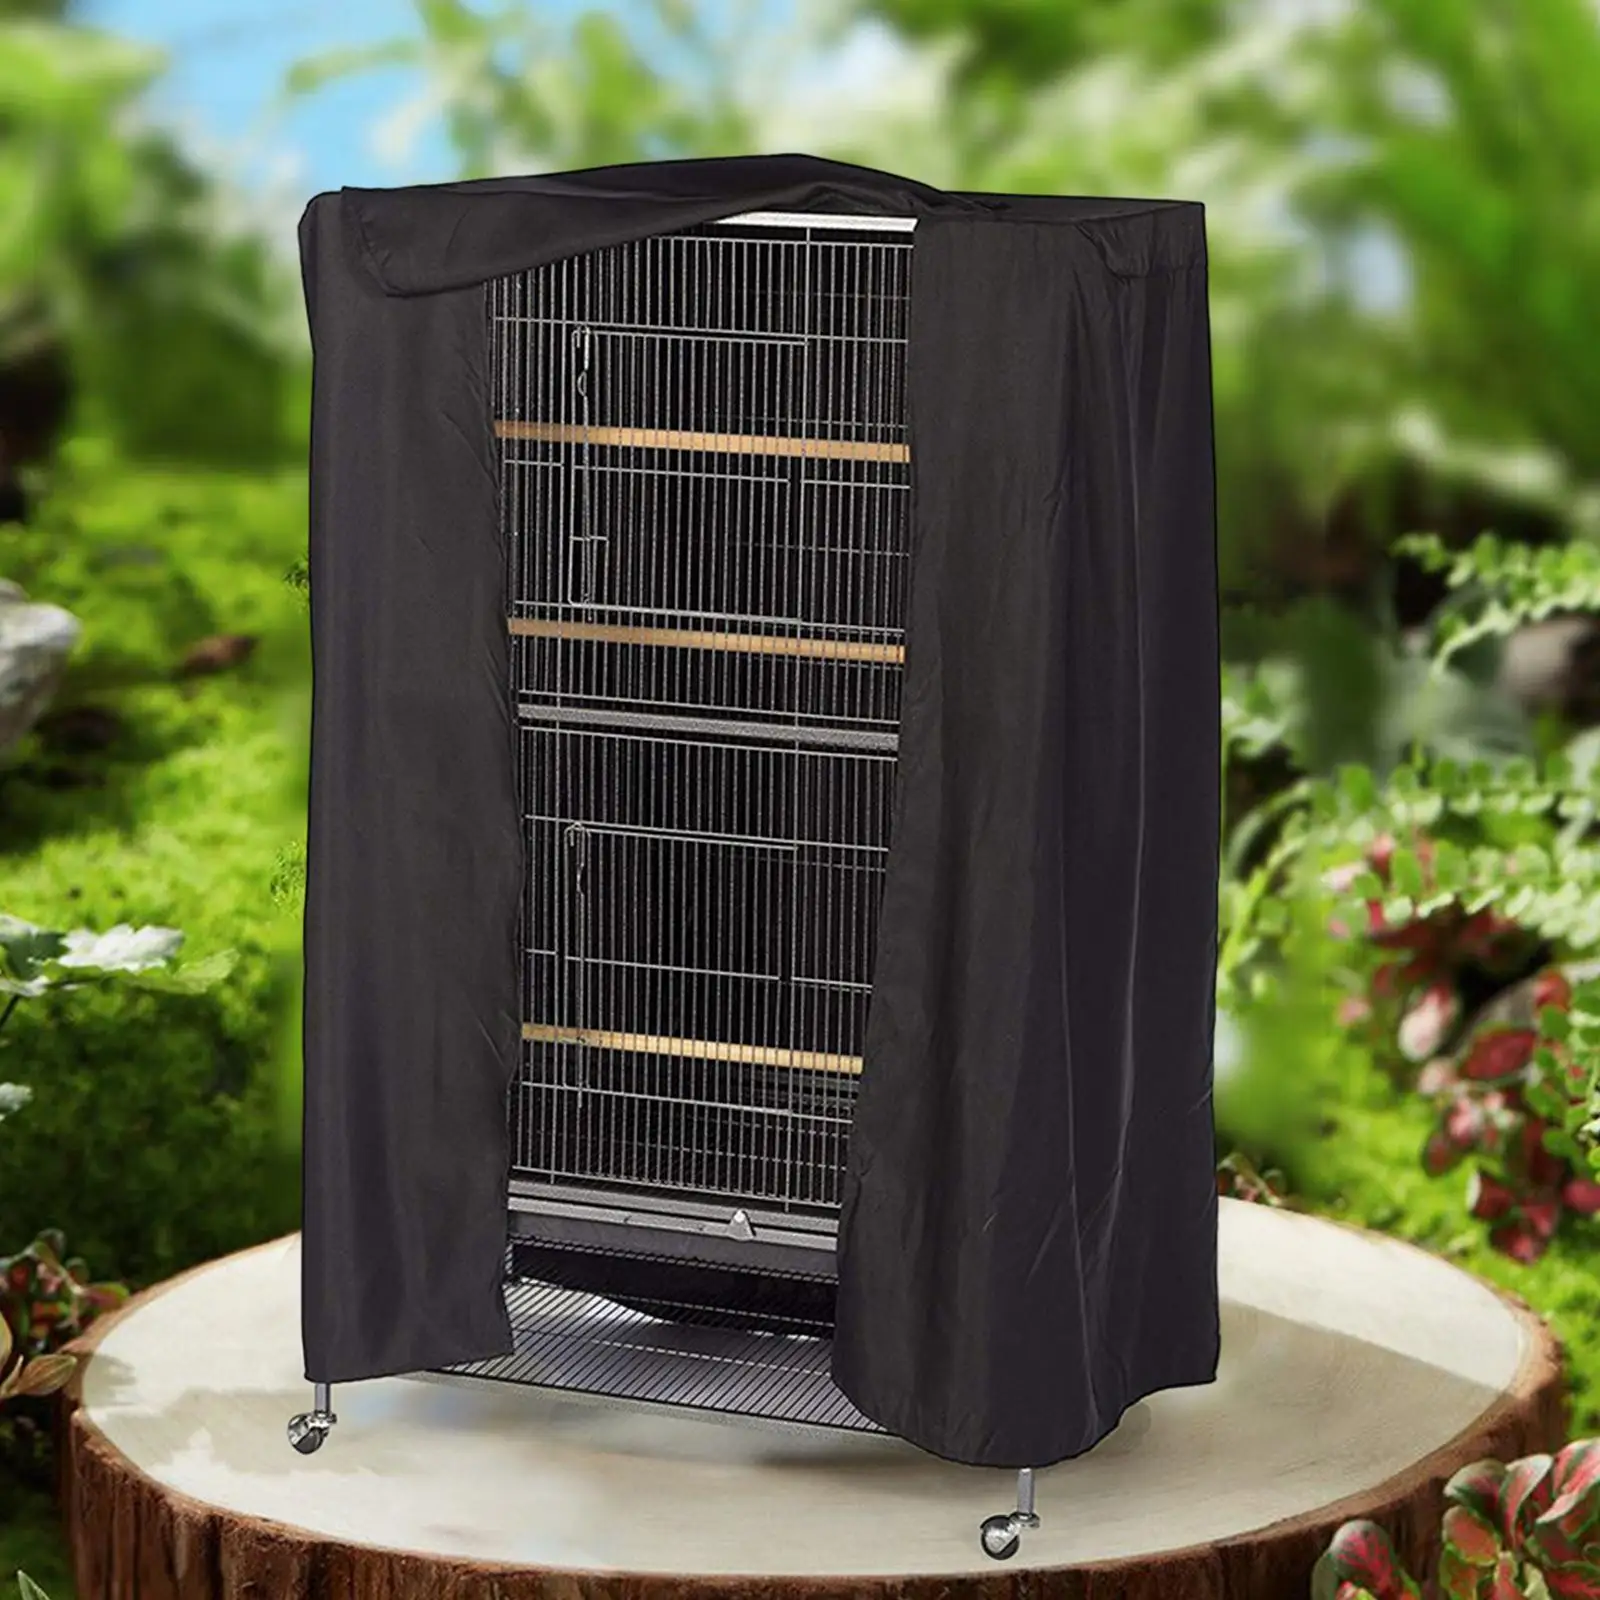 Bird Cage Cover Waterproof Dustproof Seed Catcher Cover Blackout Shade Cloth Night Supplies Privacy for Animal Cages Bird Cage